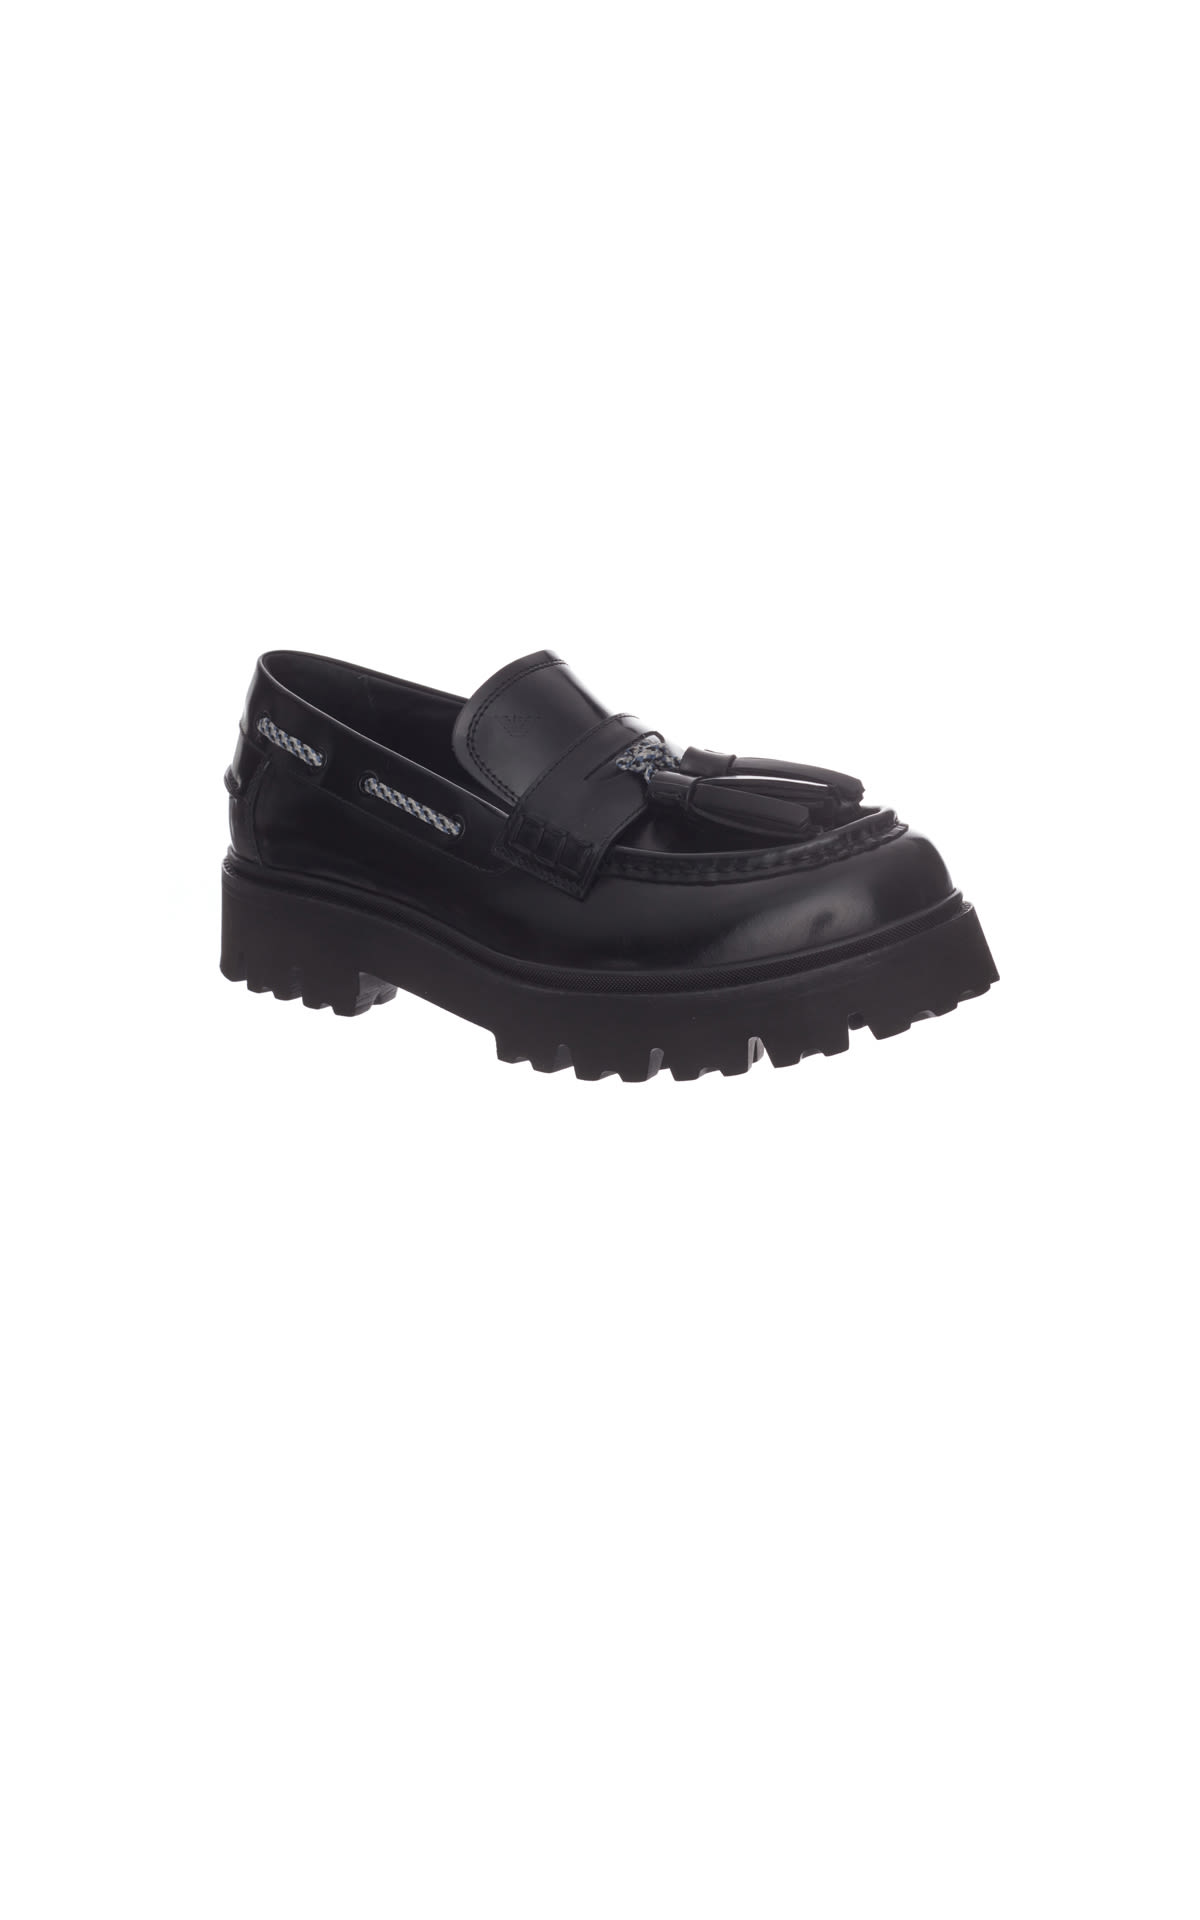 Armani Plain black loafers from Bicester Village